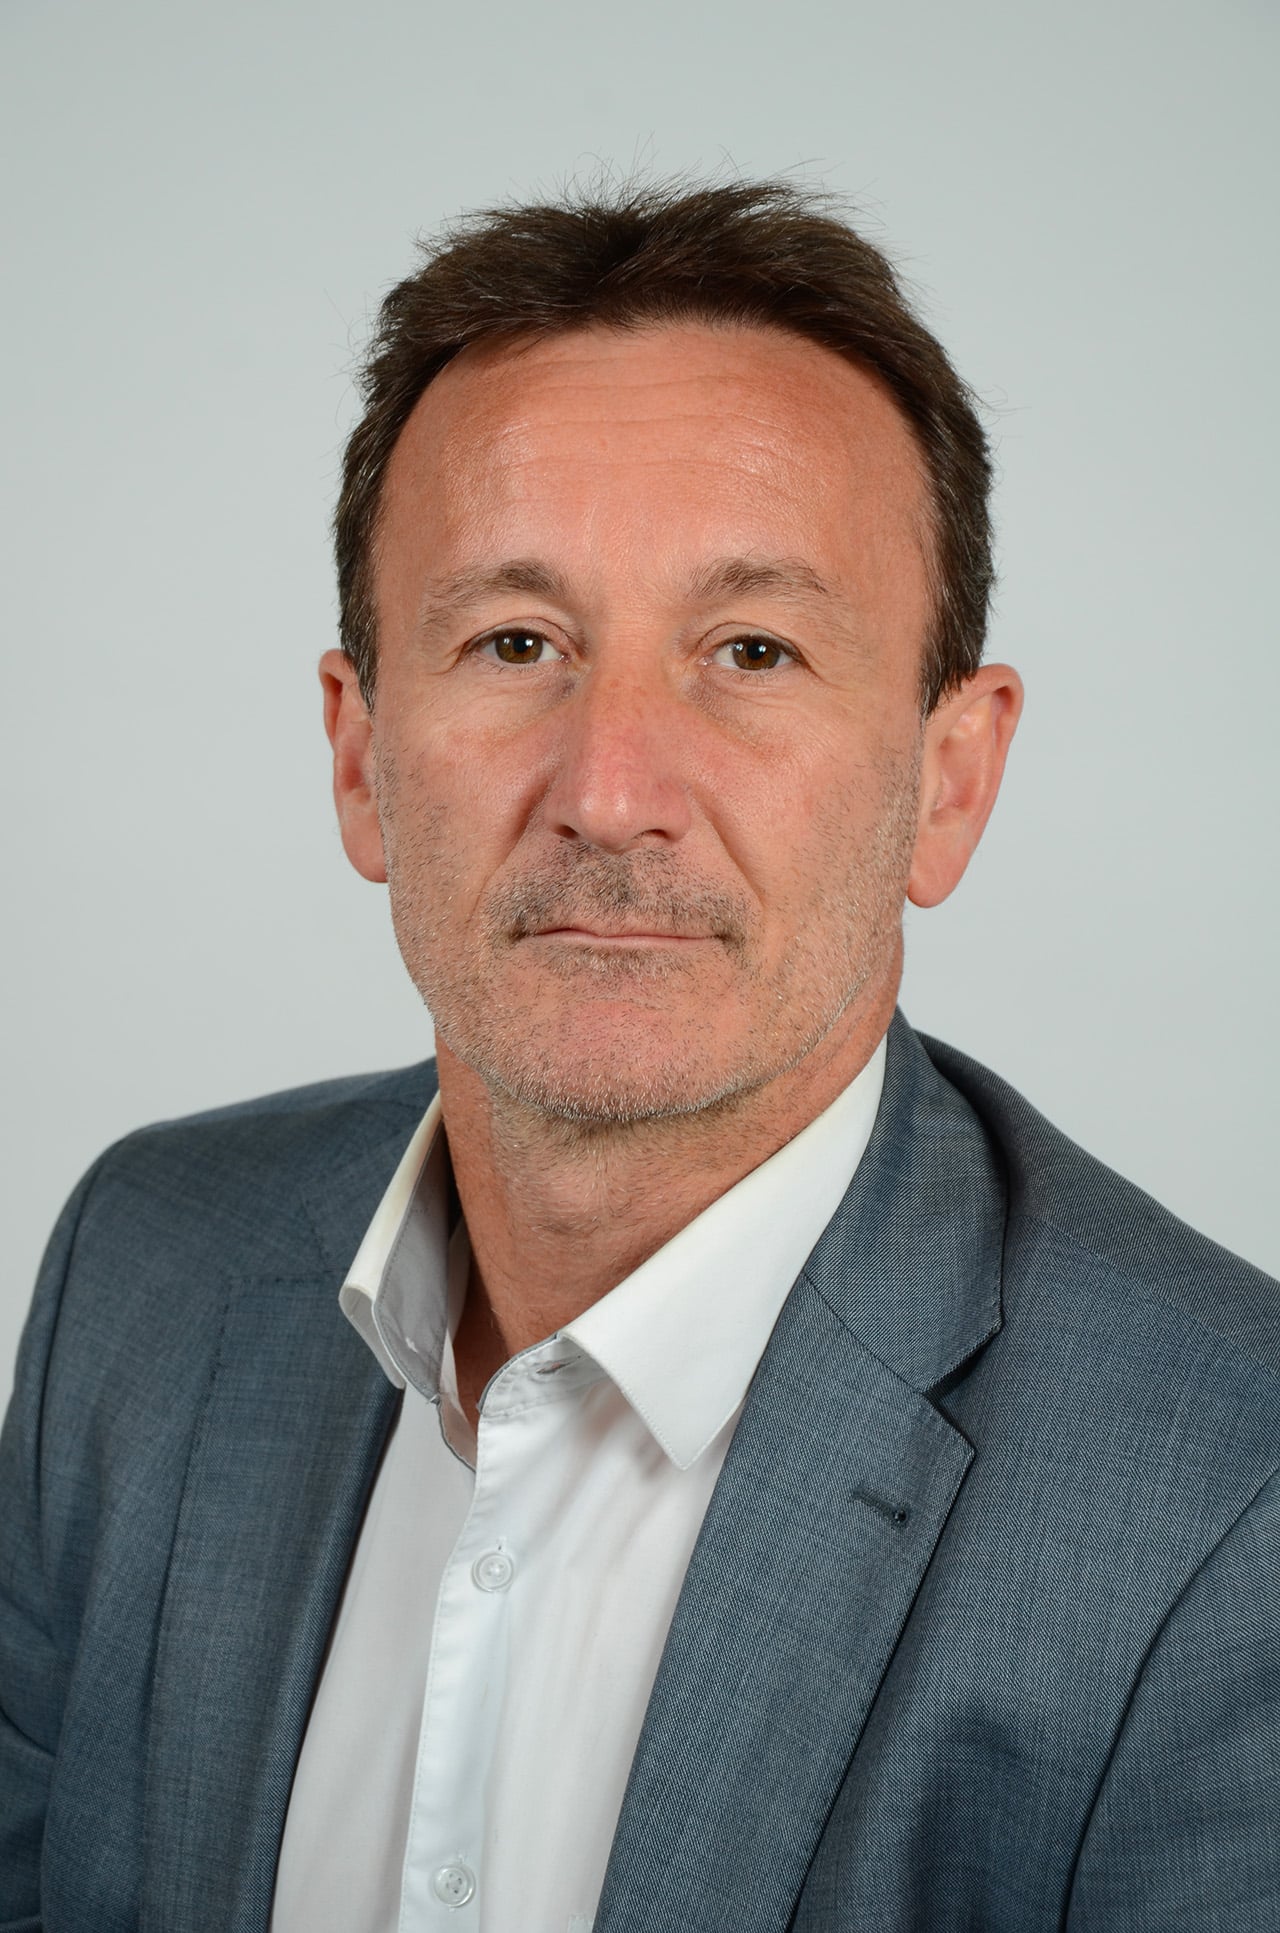 Christophe Caizergues, managing director of the VINCI Energies nuclear division